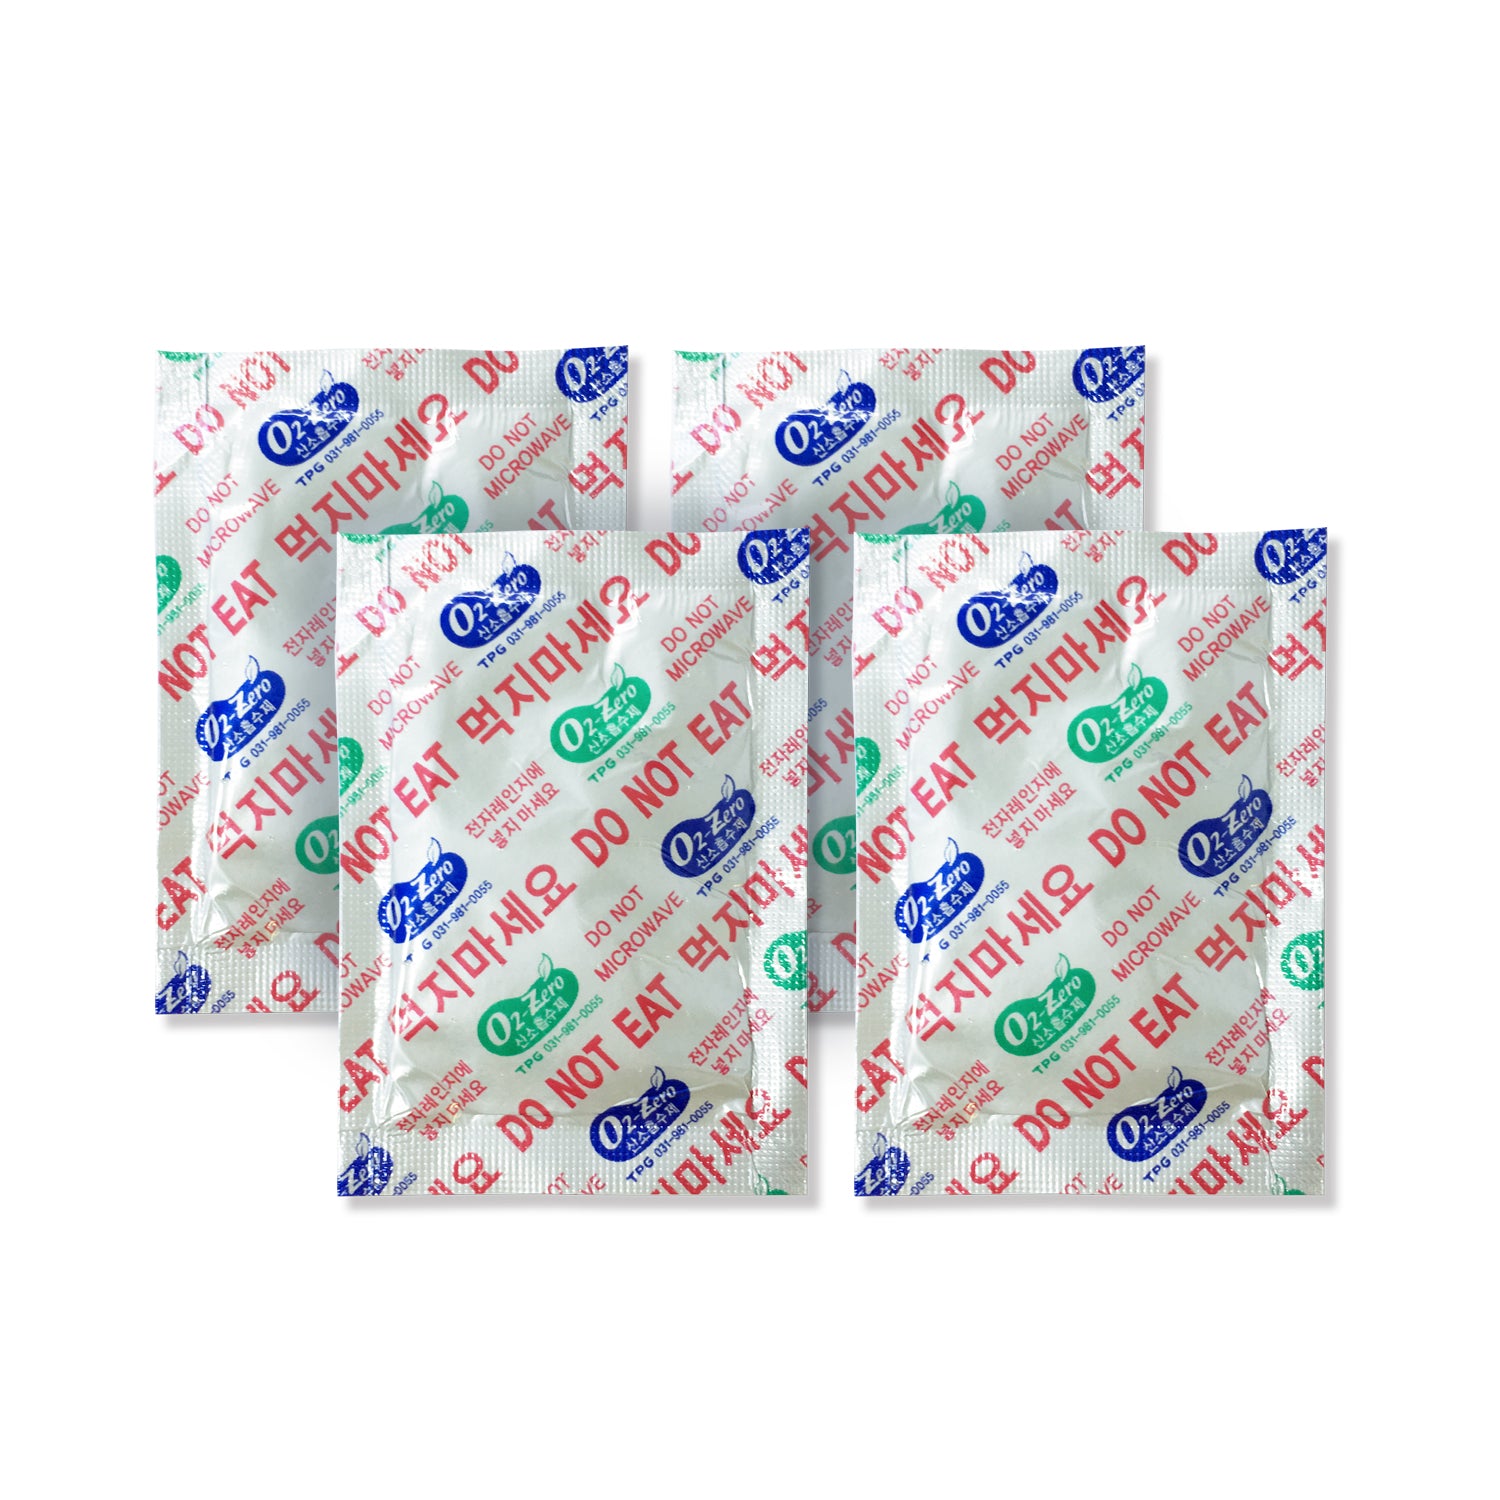 Fresh & Fresh (105 Packs) 500 CC Premium Oxygen Absorbers(1 Bag of 105 Packets) - ISO 9001 & 14001 Certified Facility Manufactured.